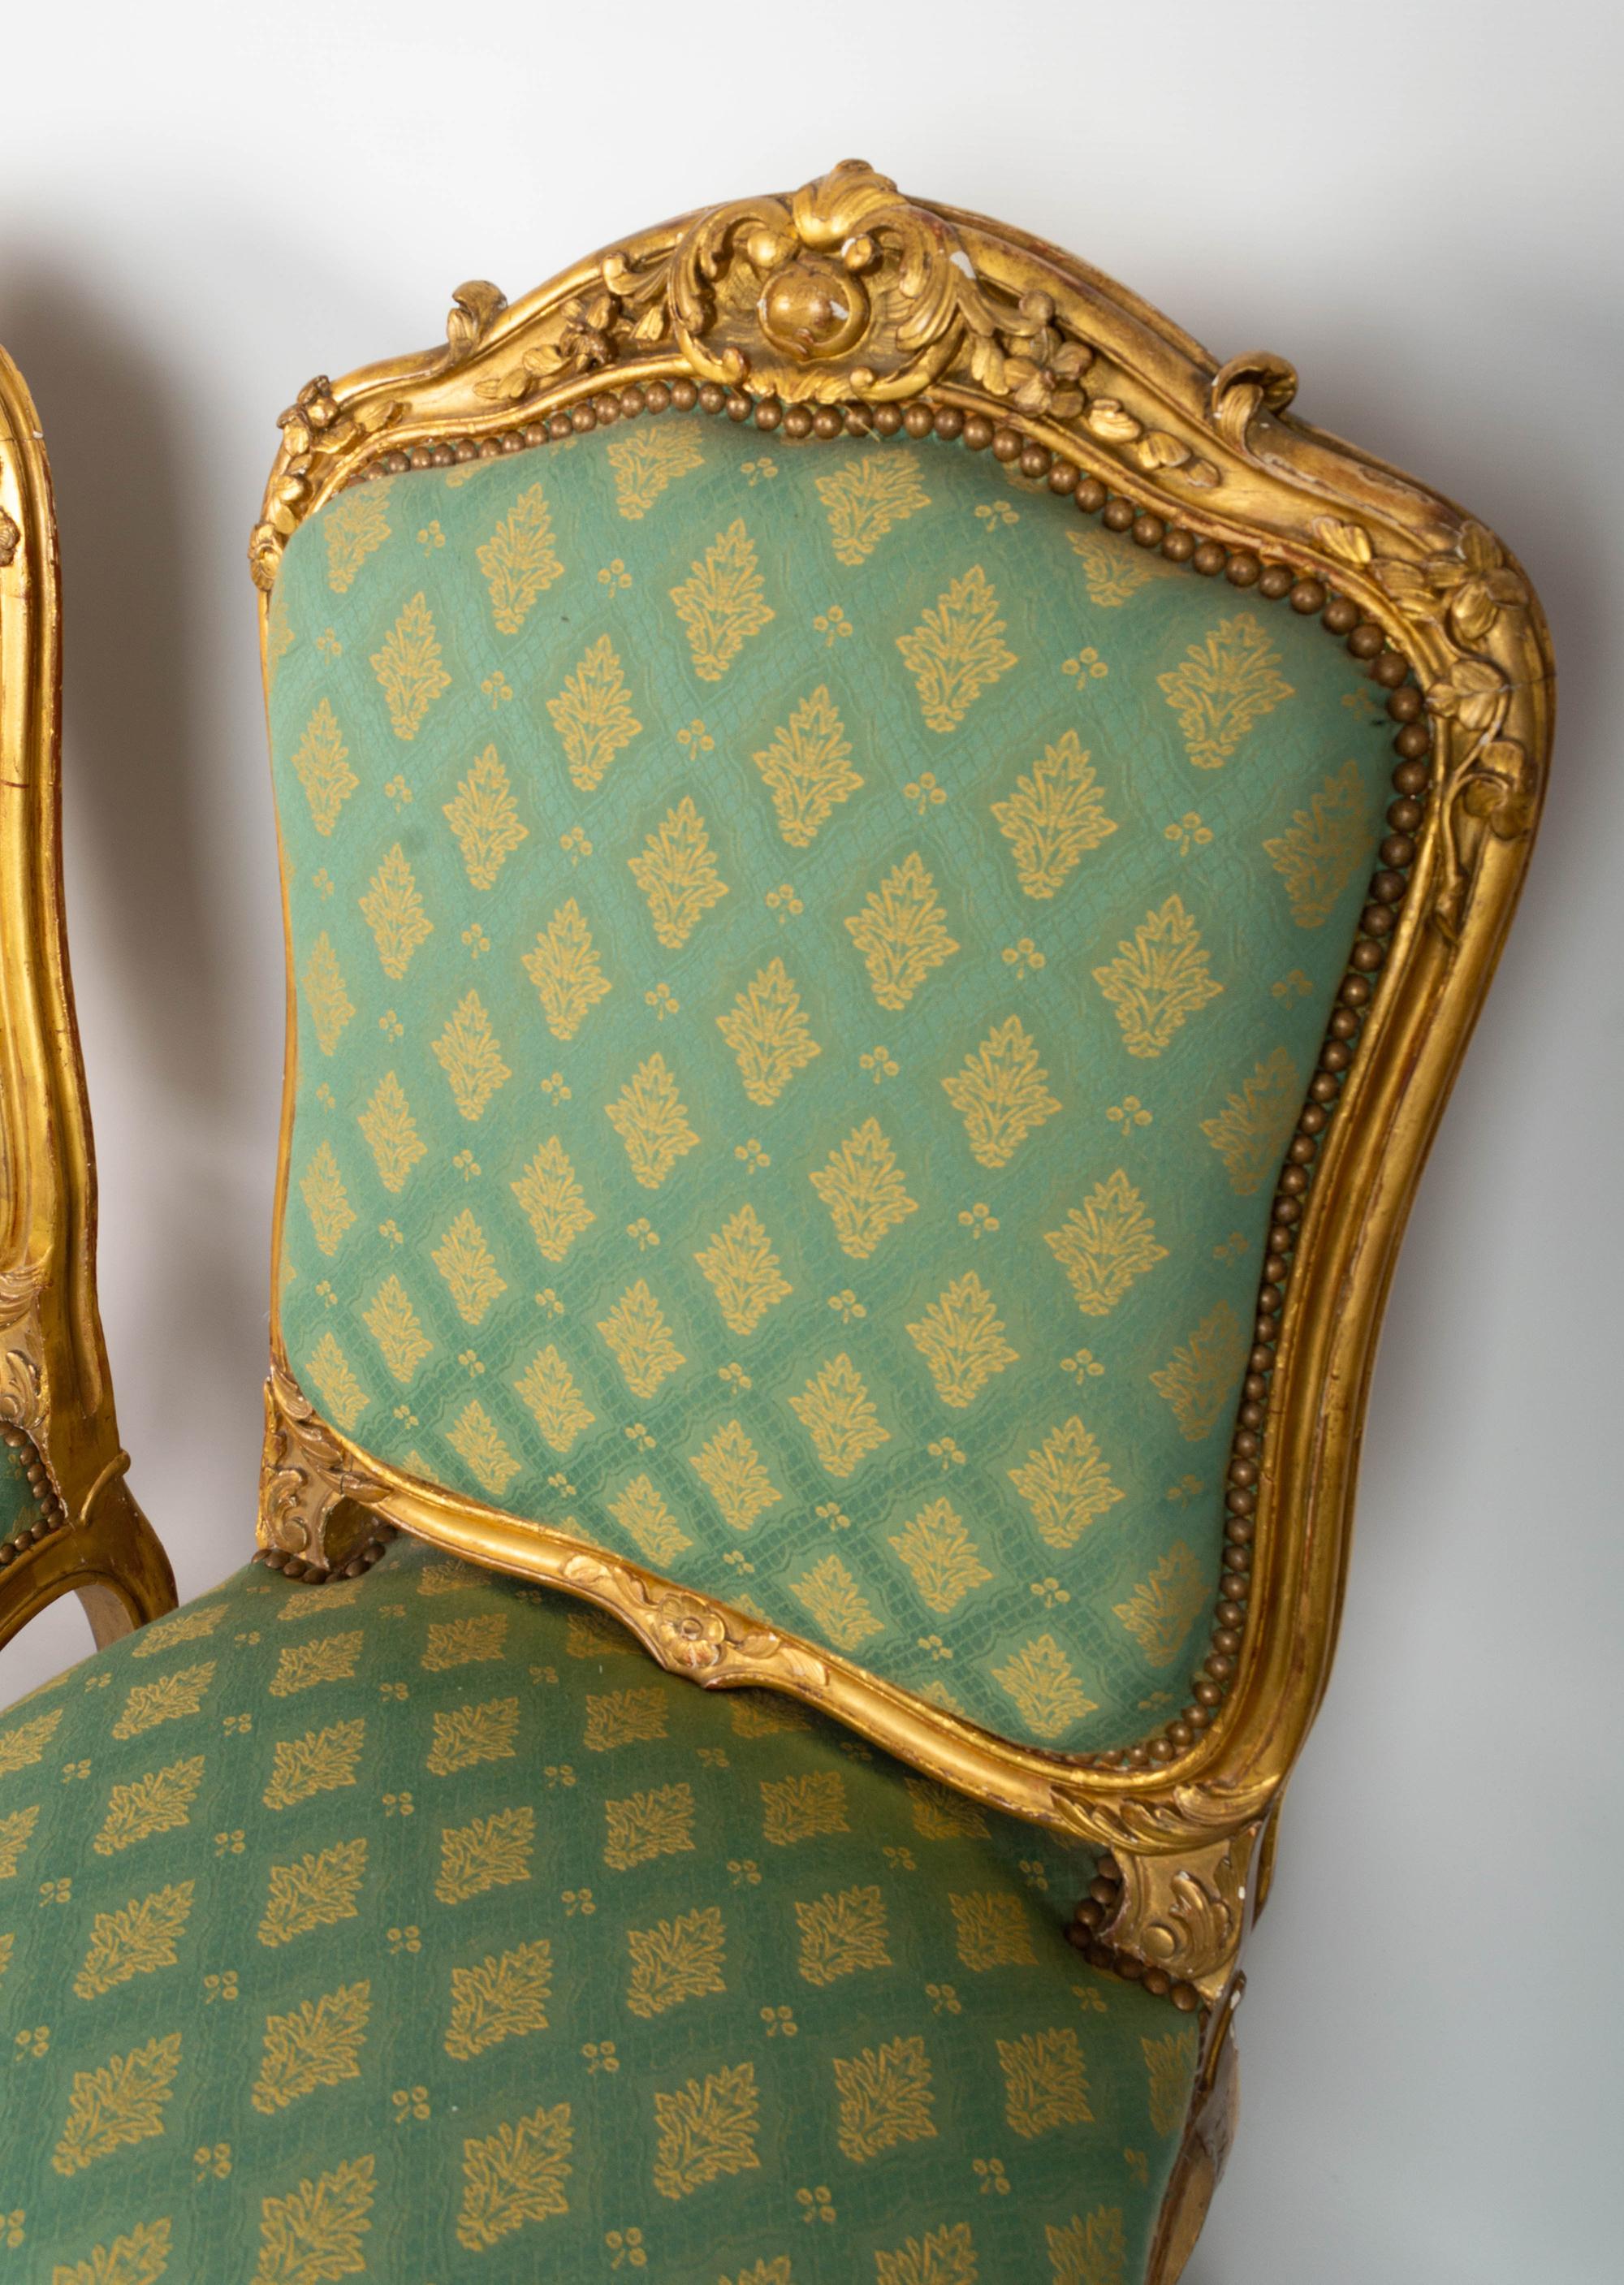 Pair Antique French 19th Century Louis XV Style Giltwood Salon Chairs C.1870 For Sale 11